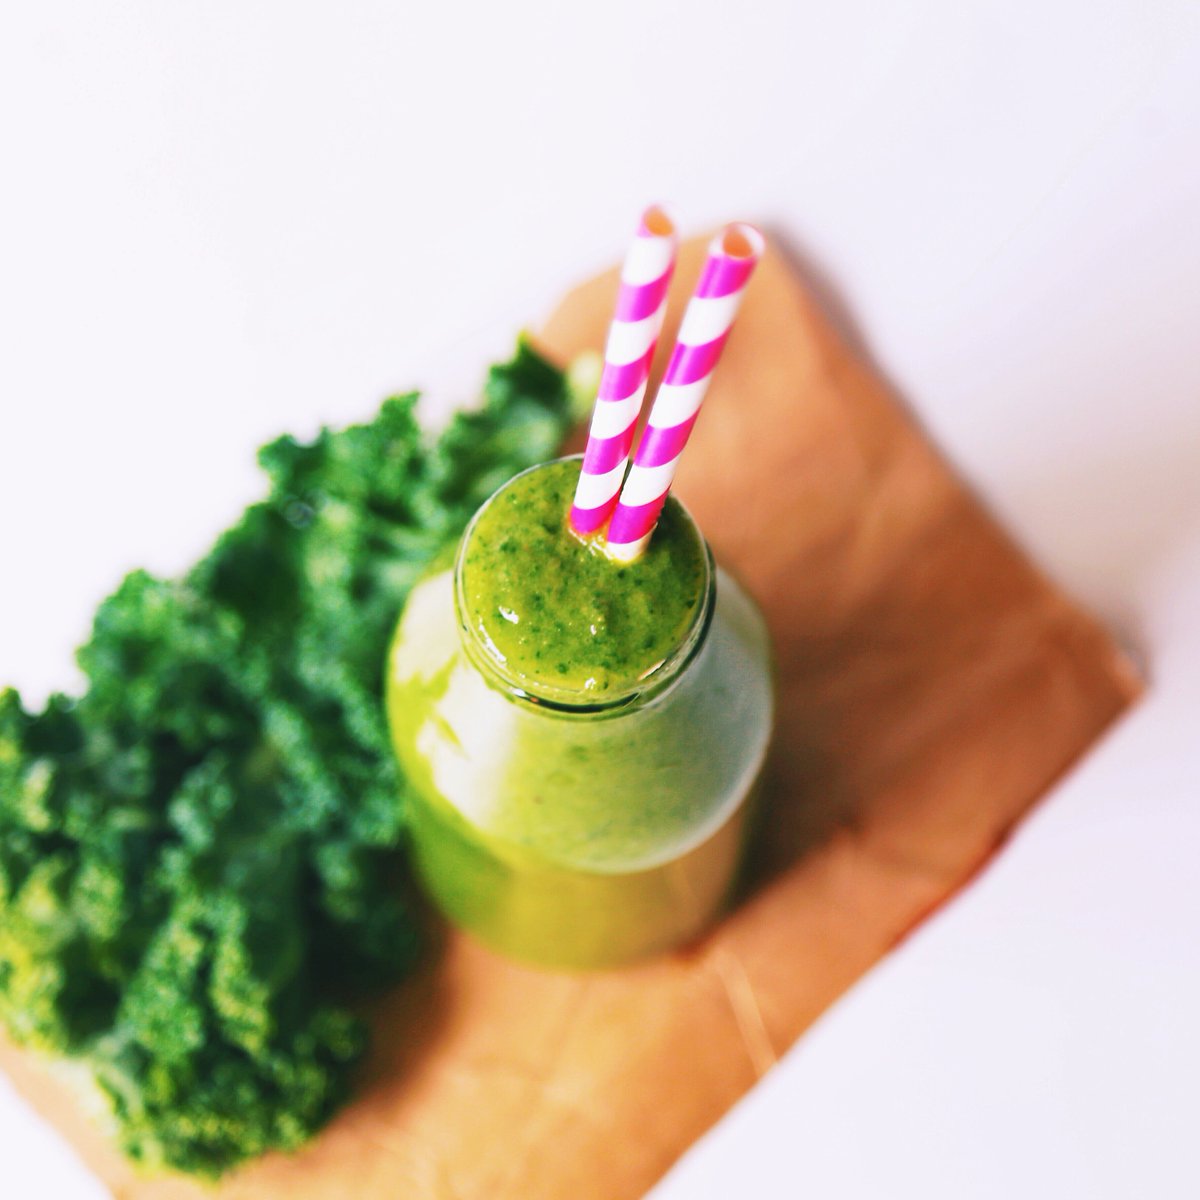 Boost your bod with organic green drinks! 💚 Get a sick discount link in your DMs. Level up your health and crush weight loss goals! 🥦💪 Feel the change! DM for link. #GetClean